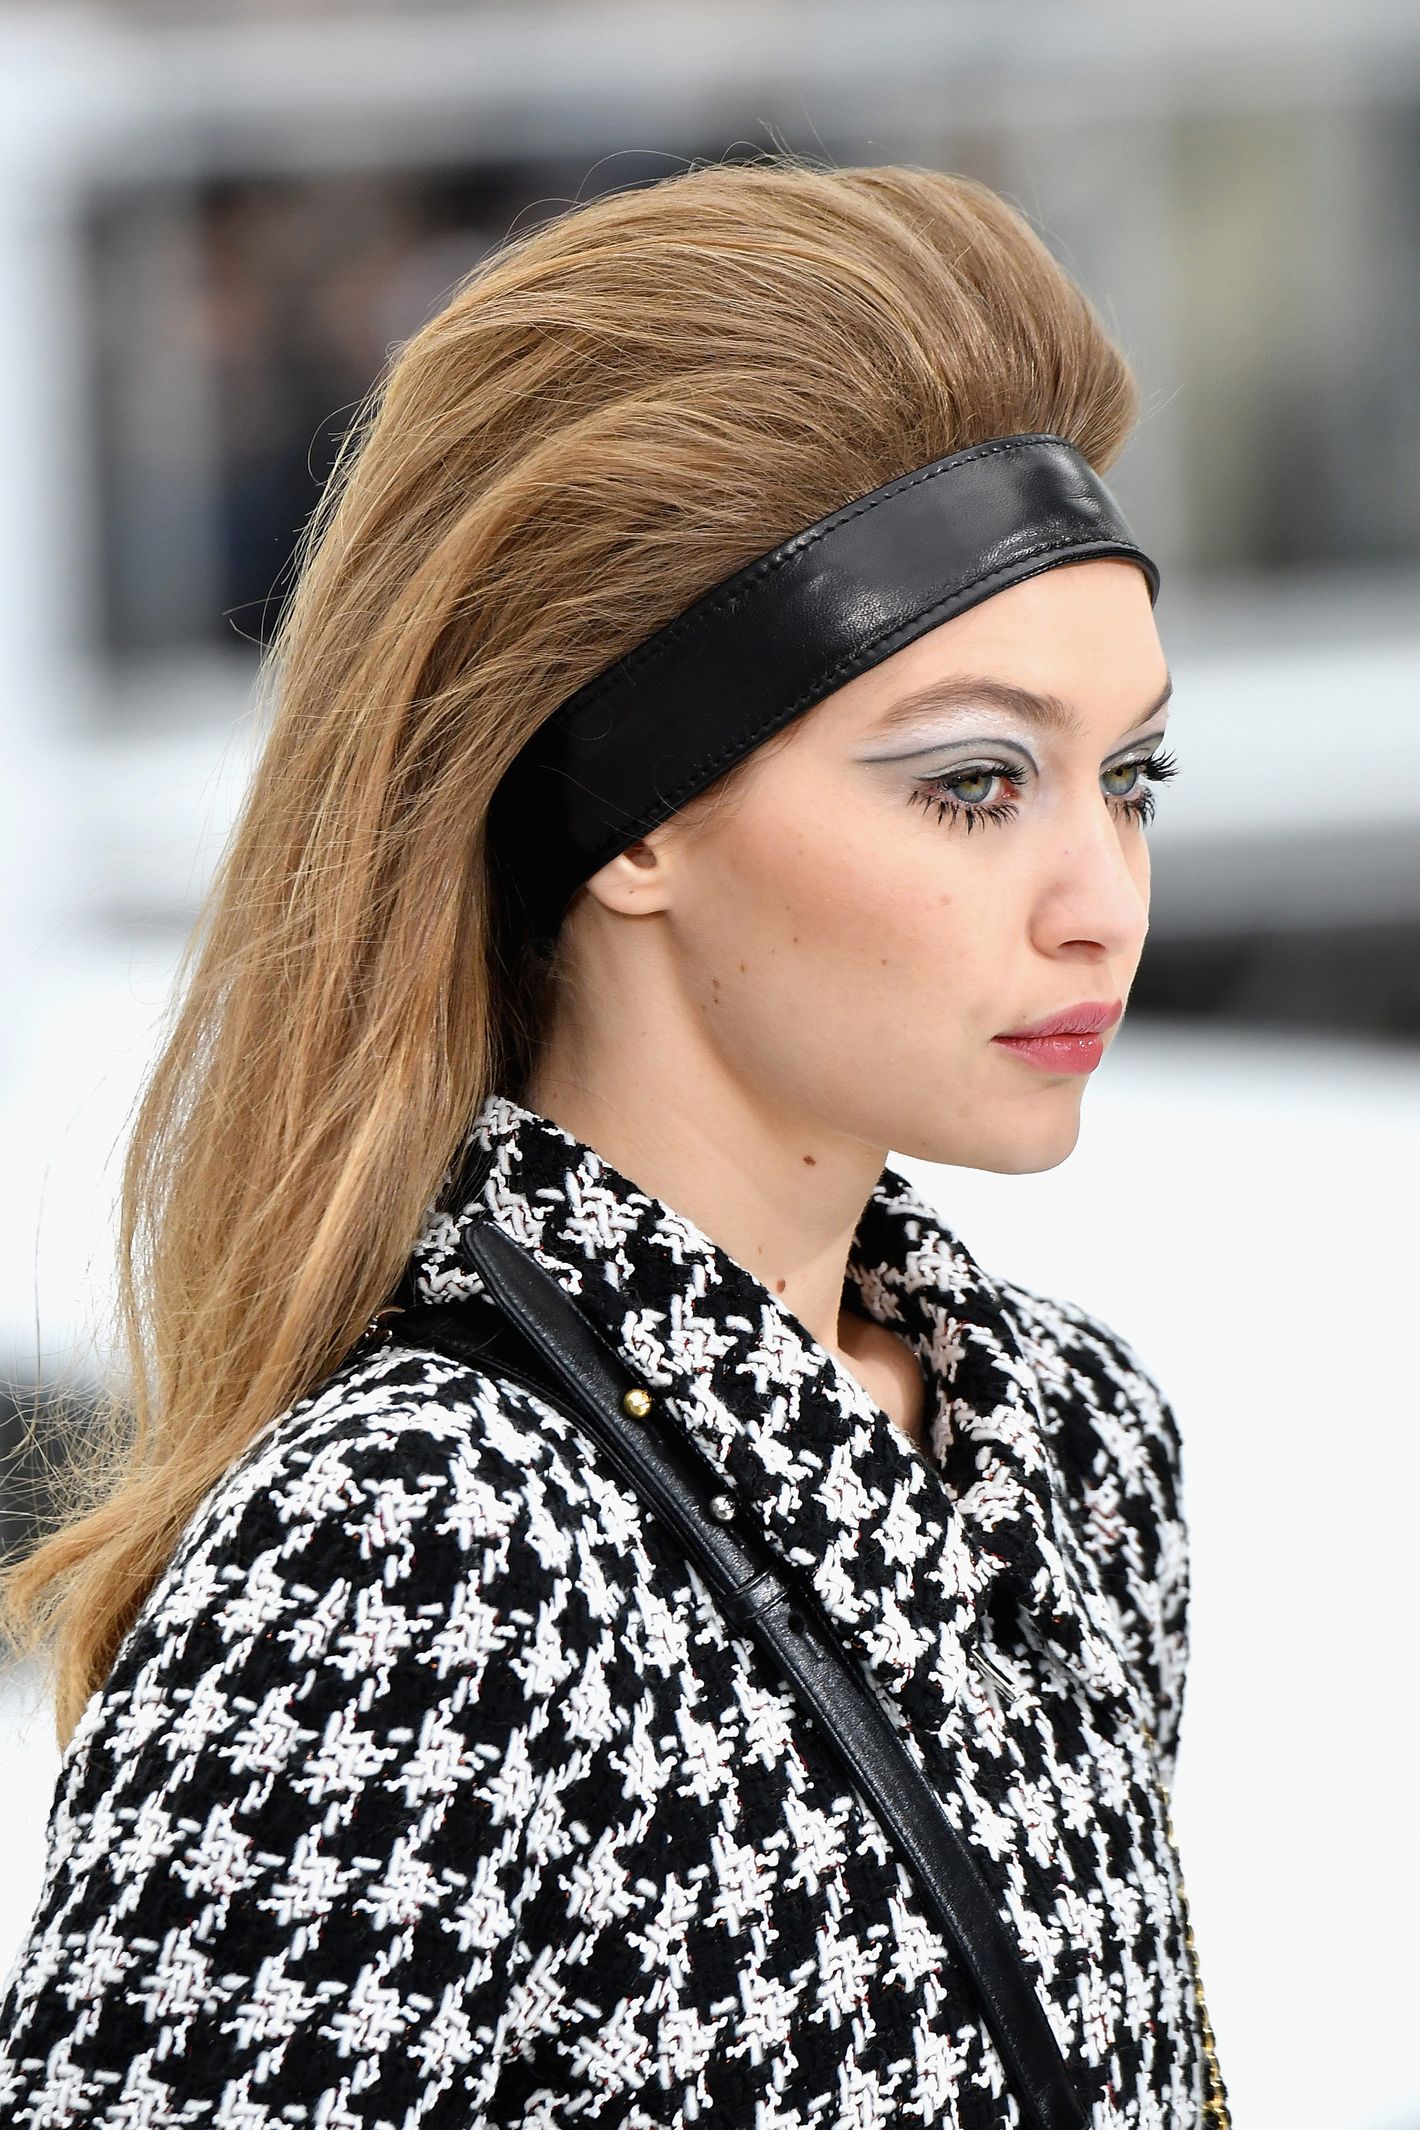 Nicola Peltz Brought the Y2K Headband and French Manicure to the Red Carpet  — See the Photos